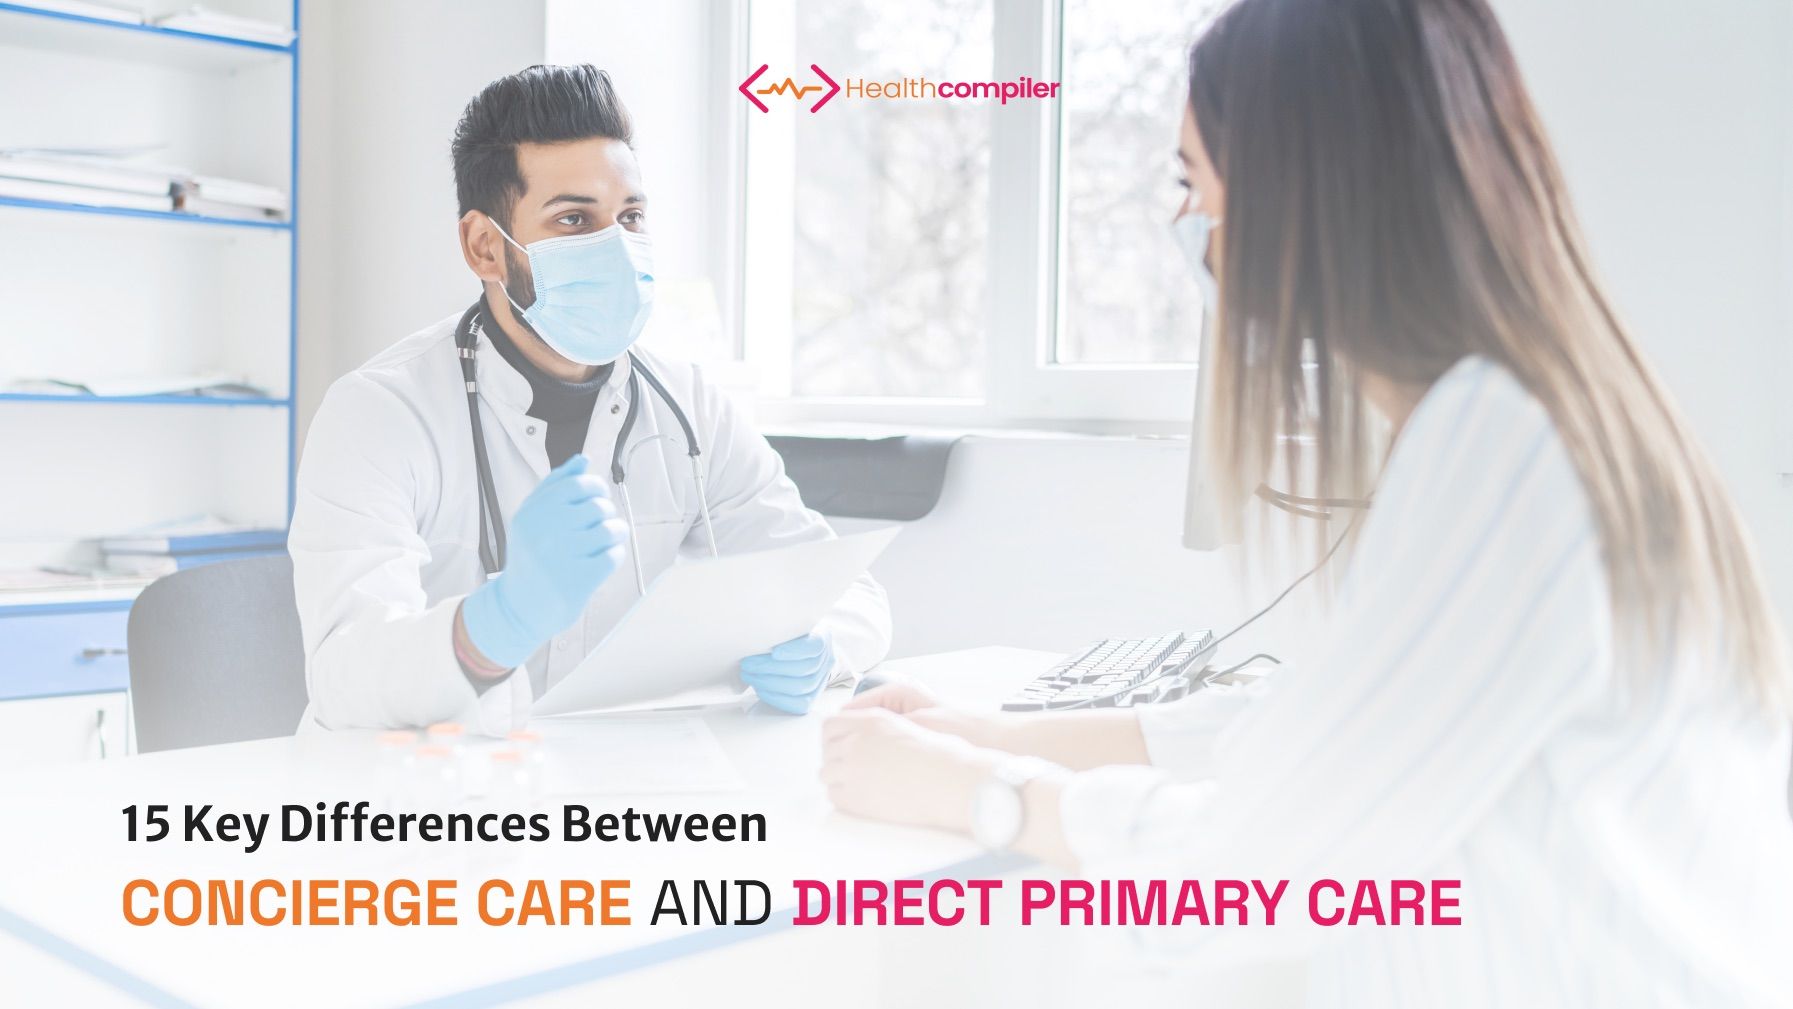 15 Key Differences Between Concierge Care and Direct Primary Care